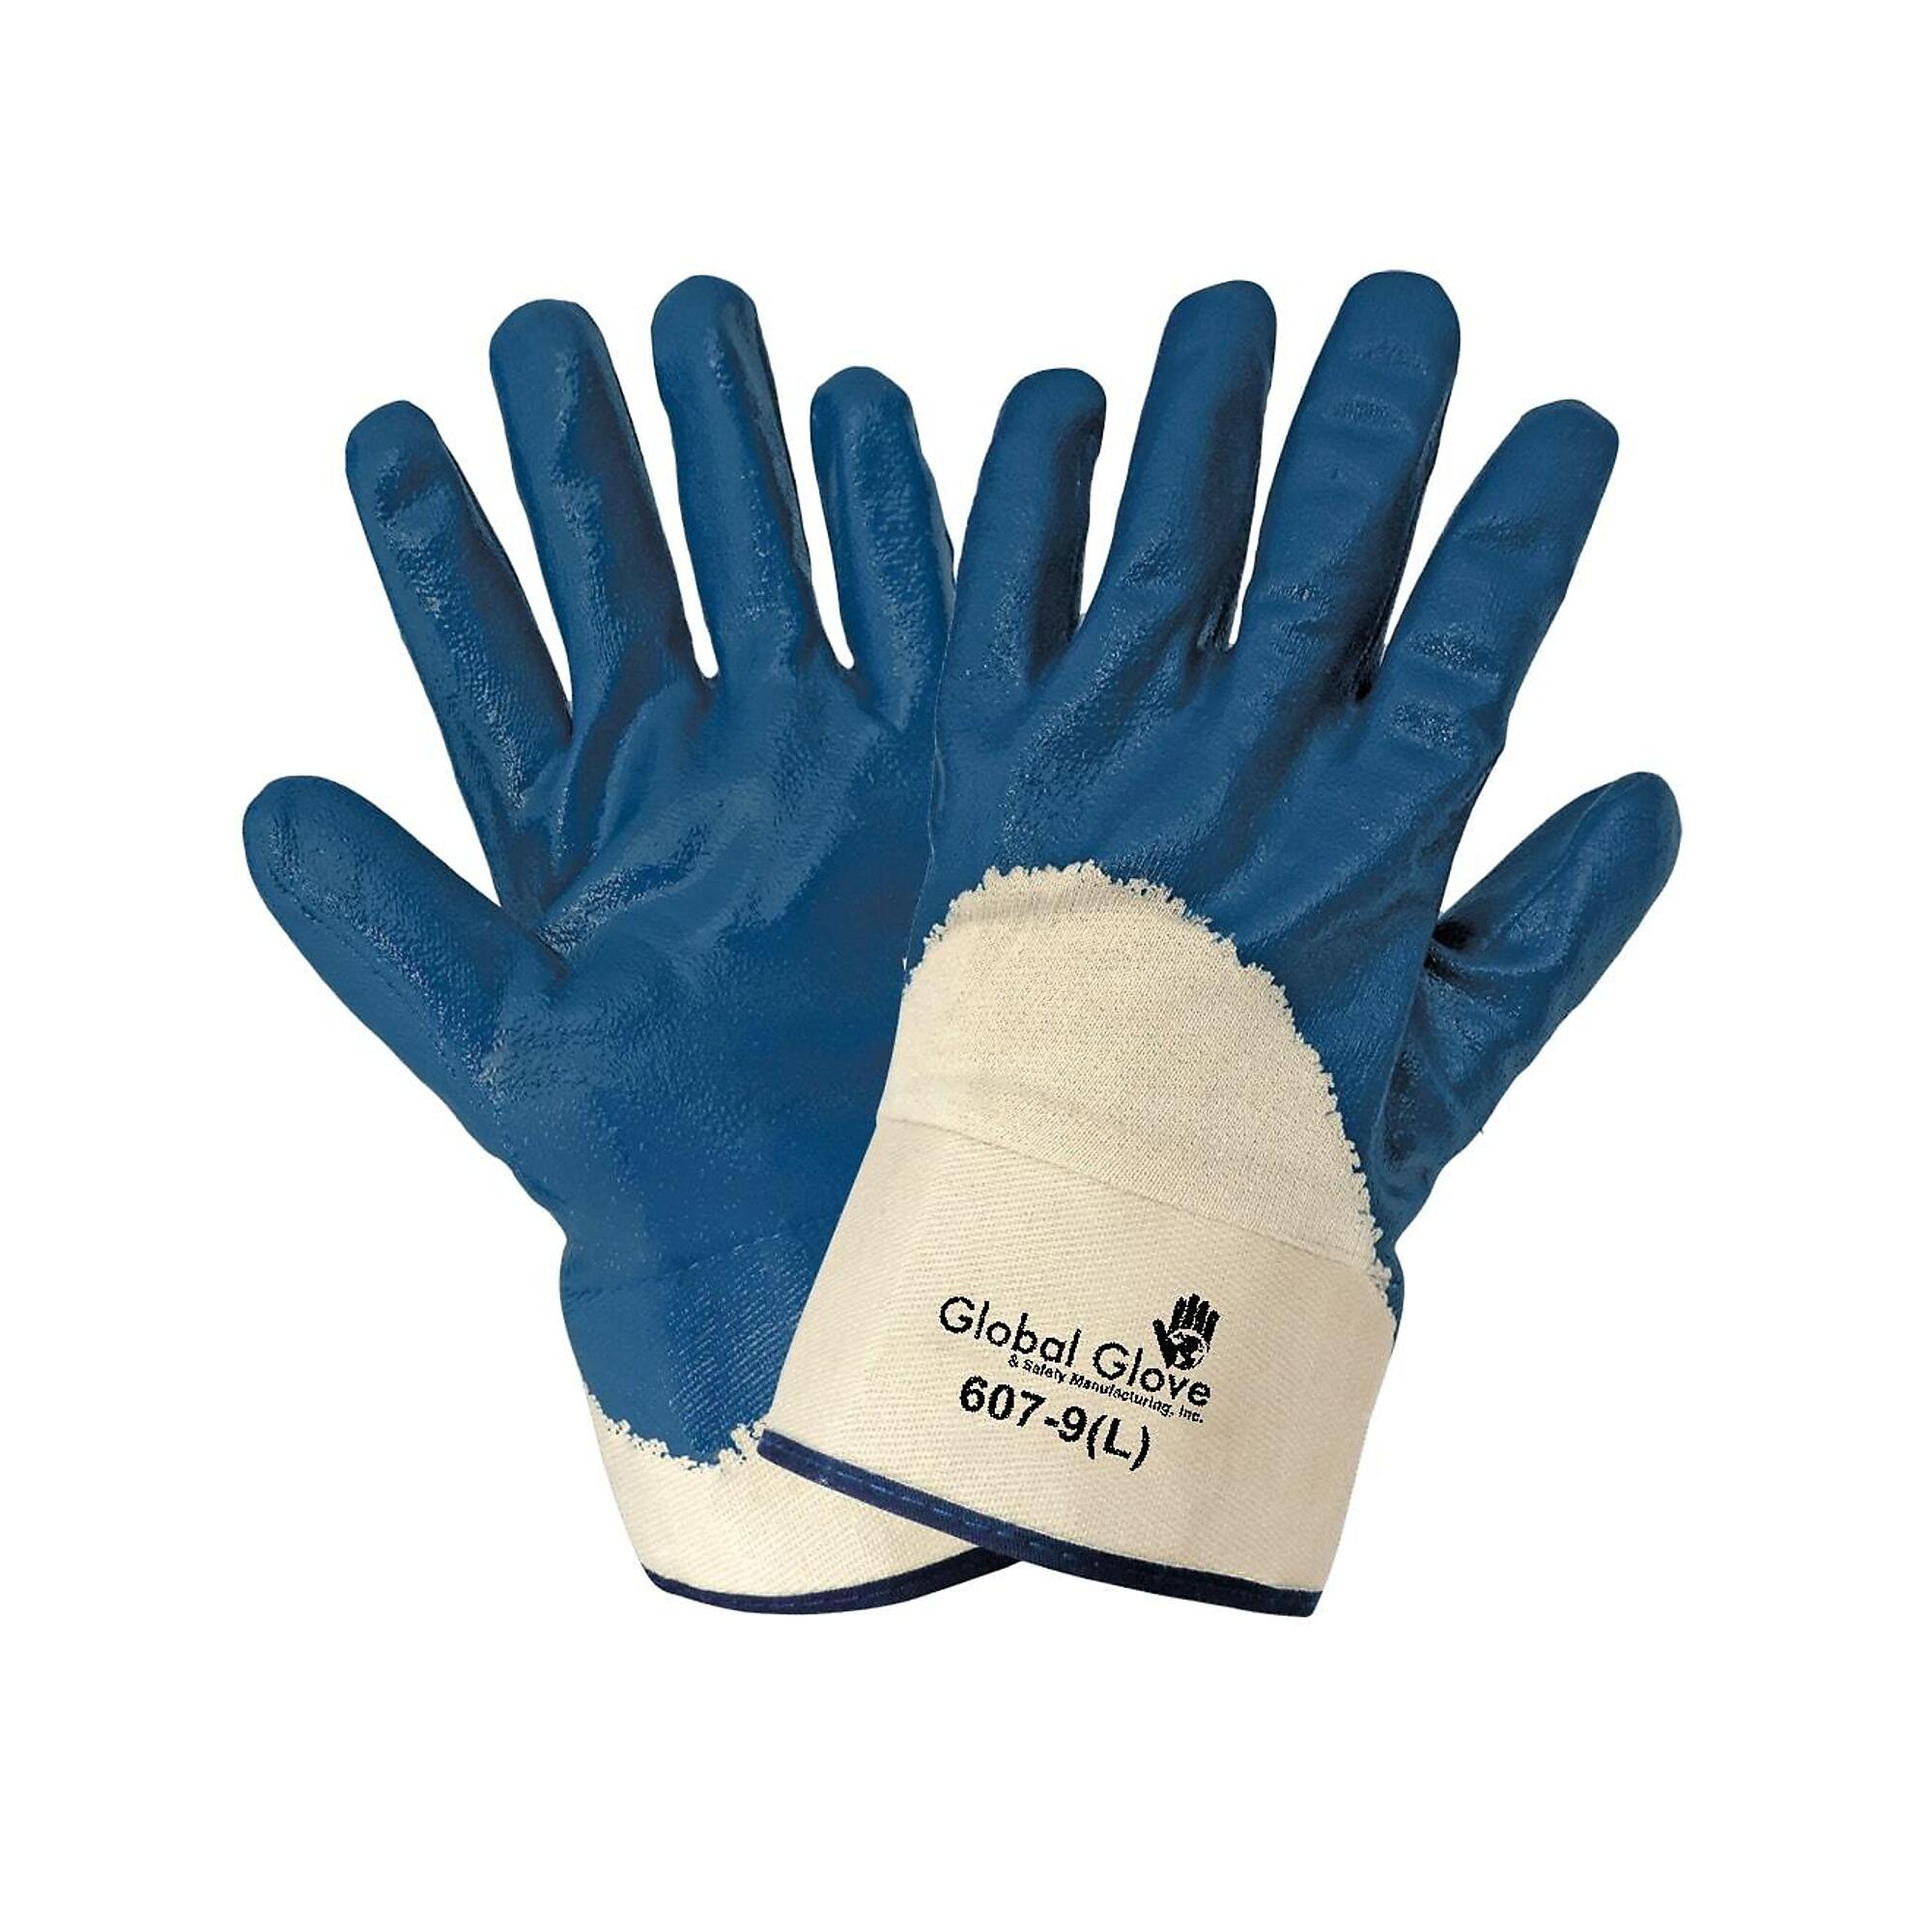 Global Glove, Tan, Blue 3/4 Nitrile Coat, Cut Resist A2 Gloves - 12 Pairs, Size M, Color Tan/Blue, Included (qty.) 12 Model 607-8(M)